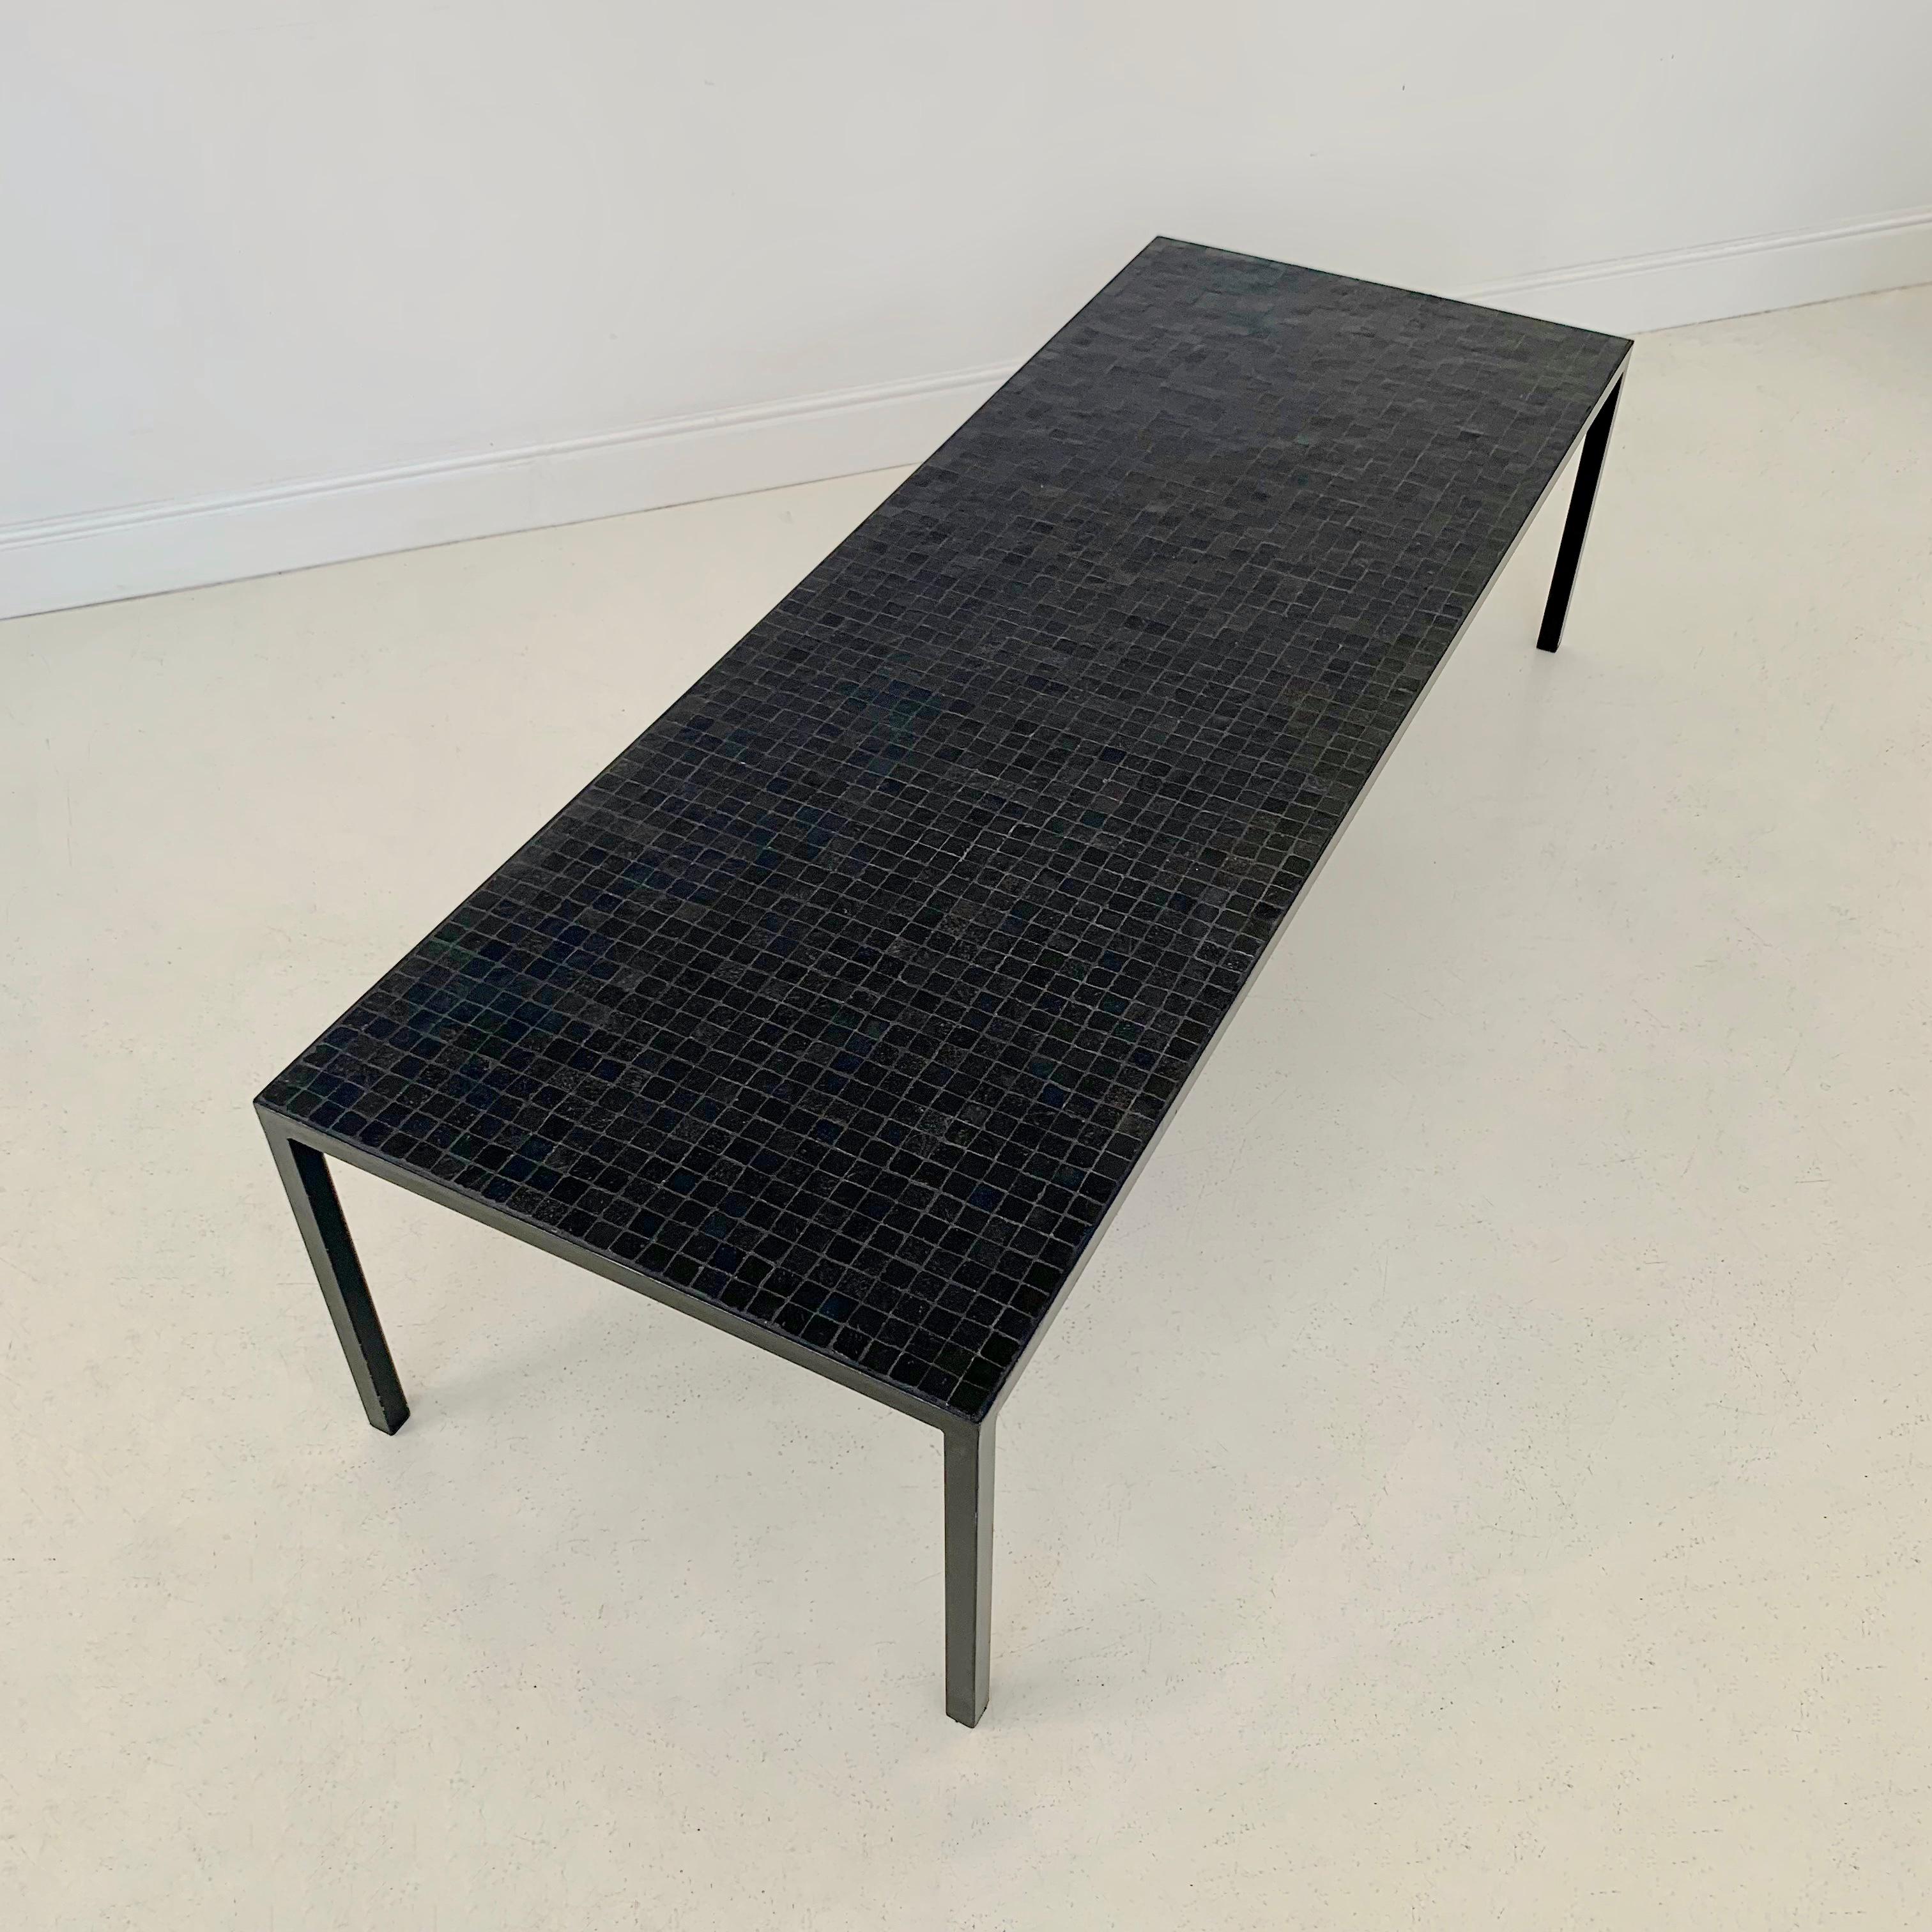 Mid-Century Modern Black Mosaic Coffee Table by Berthold Muller, circa 1960, Germany.